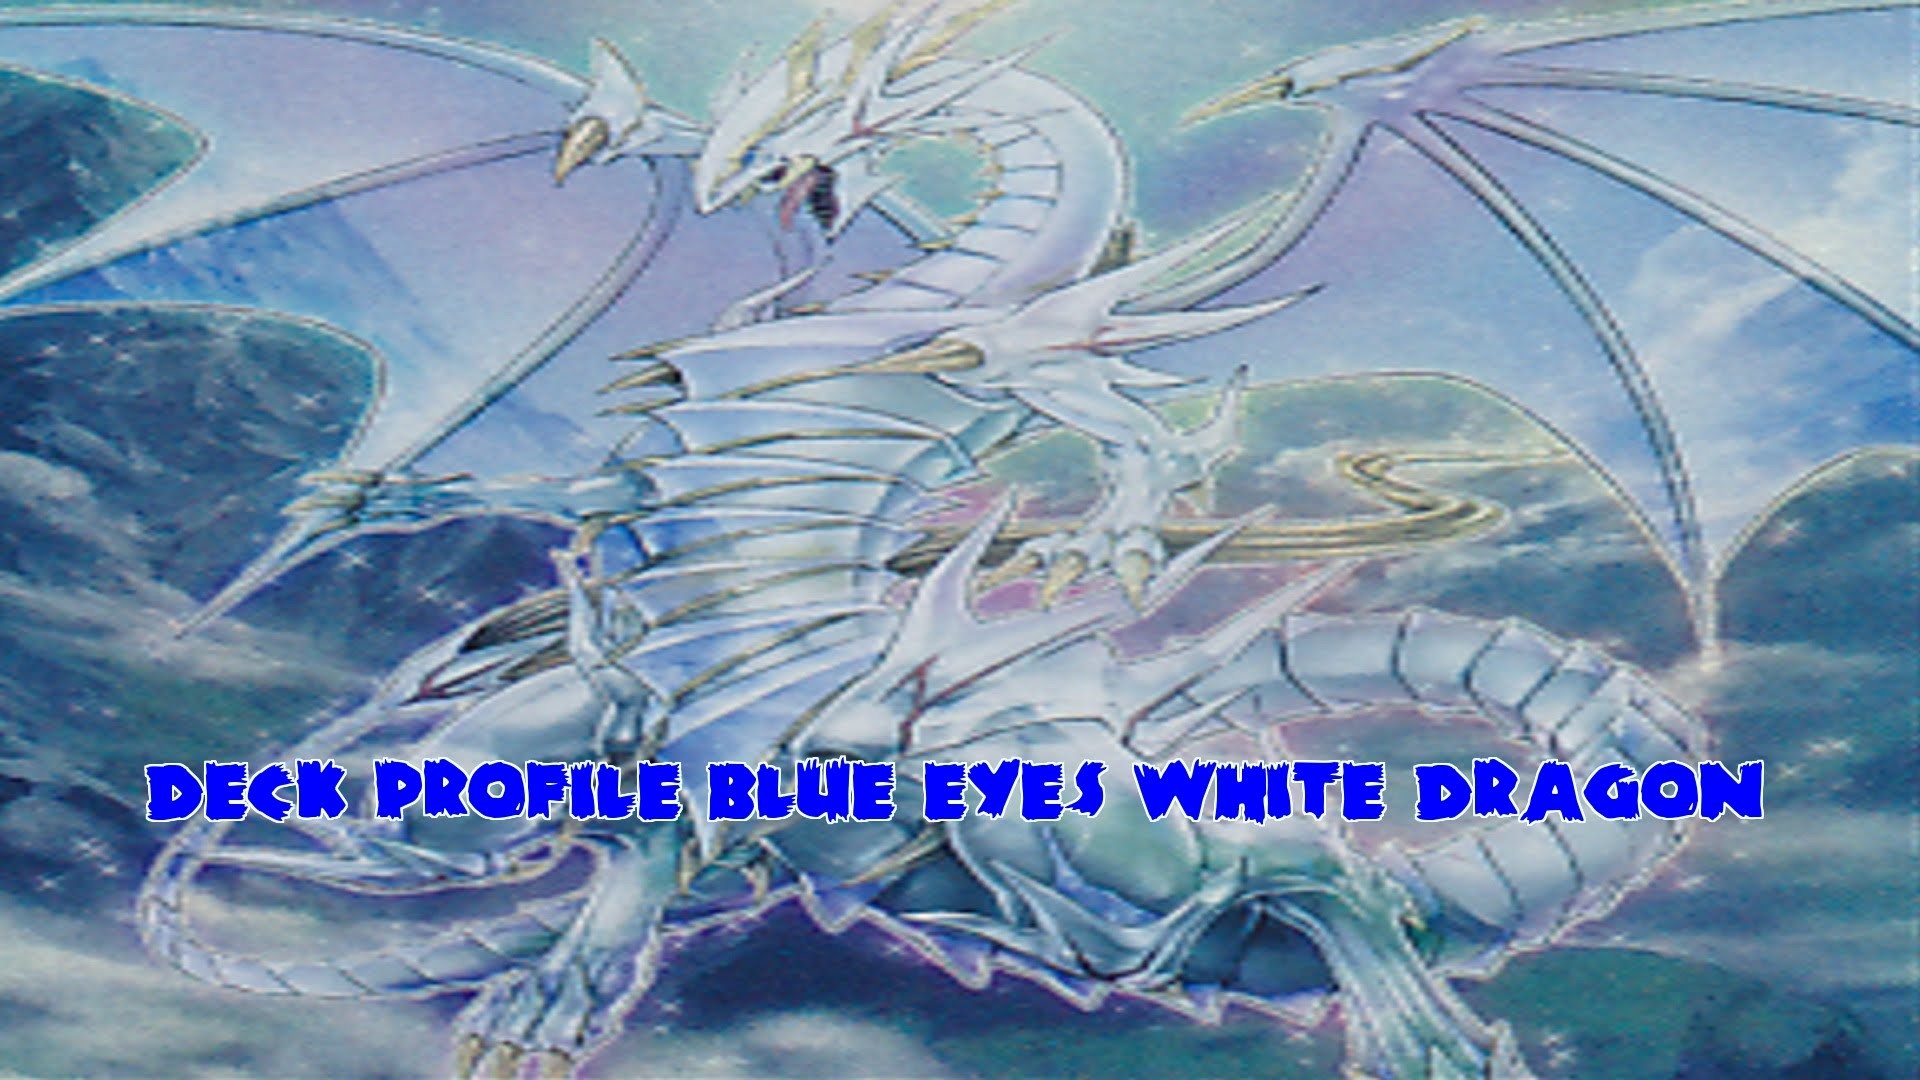 1920x1080 Yugioh Blue Eyes White Dragon Duels with Deck Profile February 2016 -  YouTube